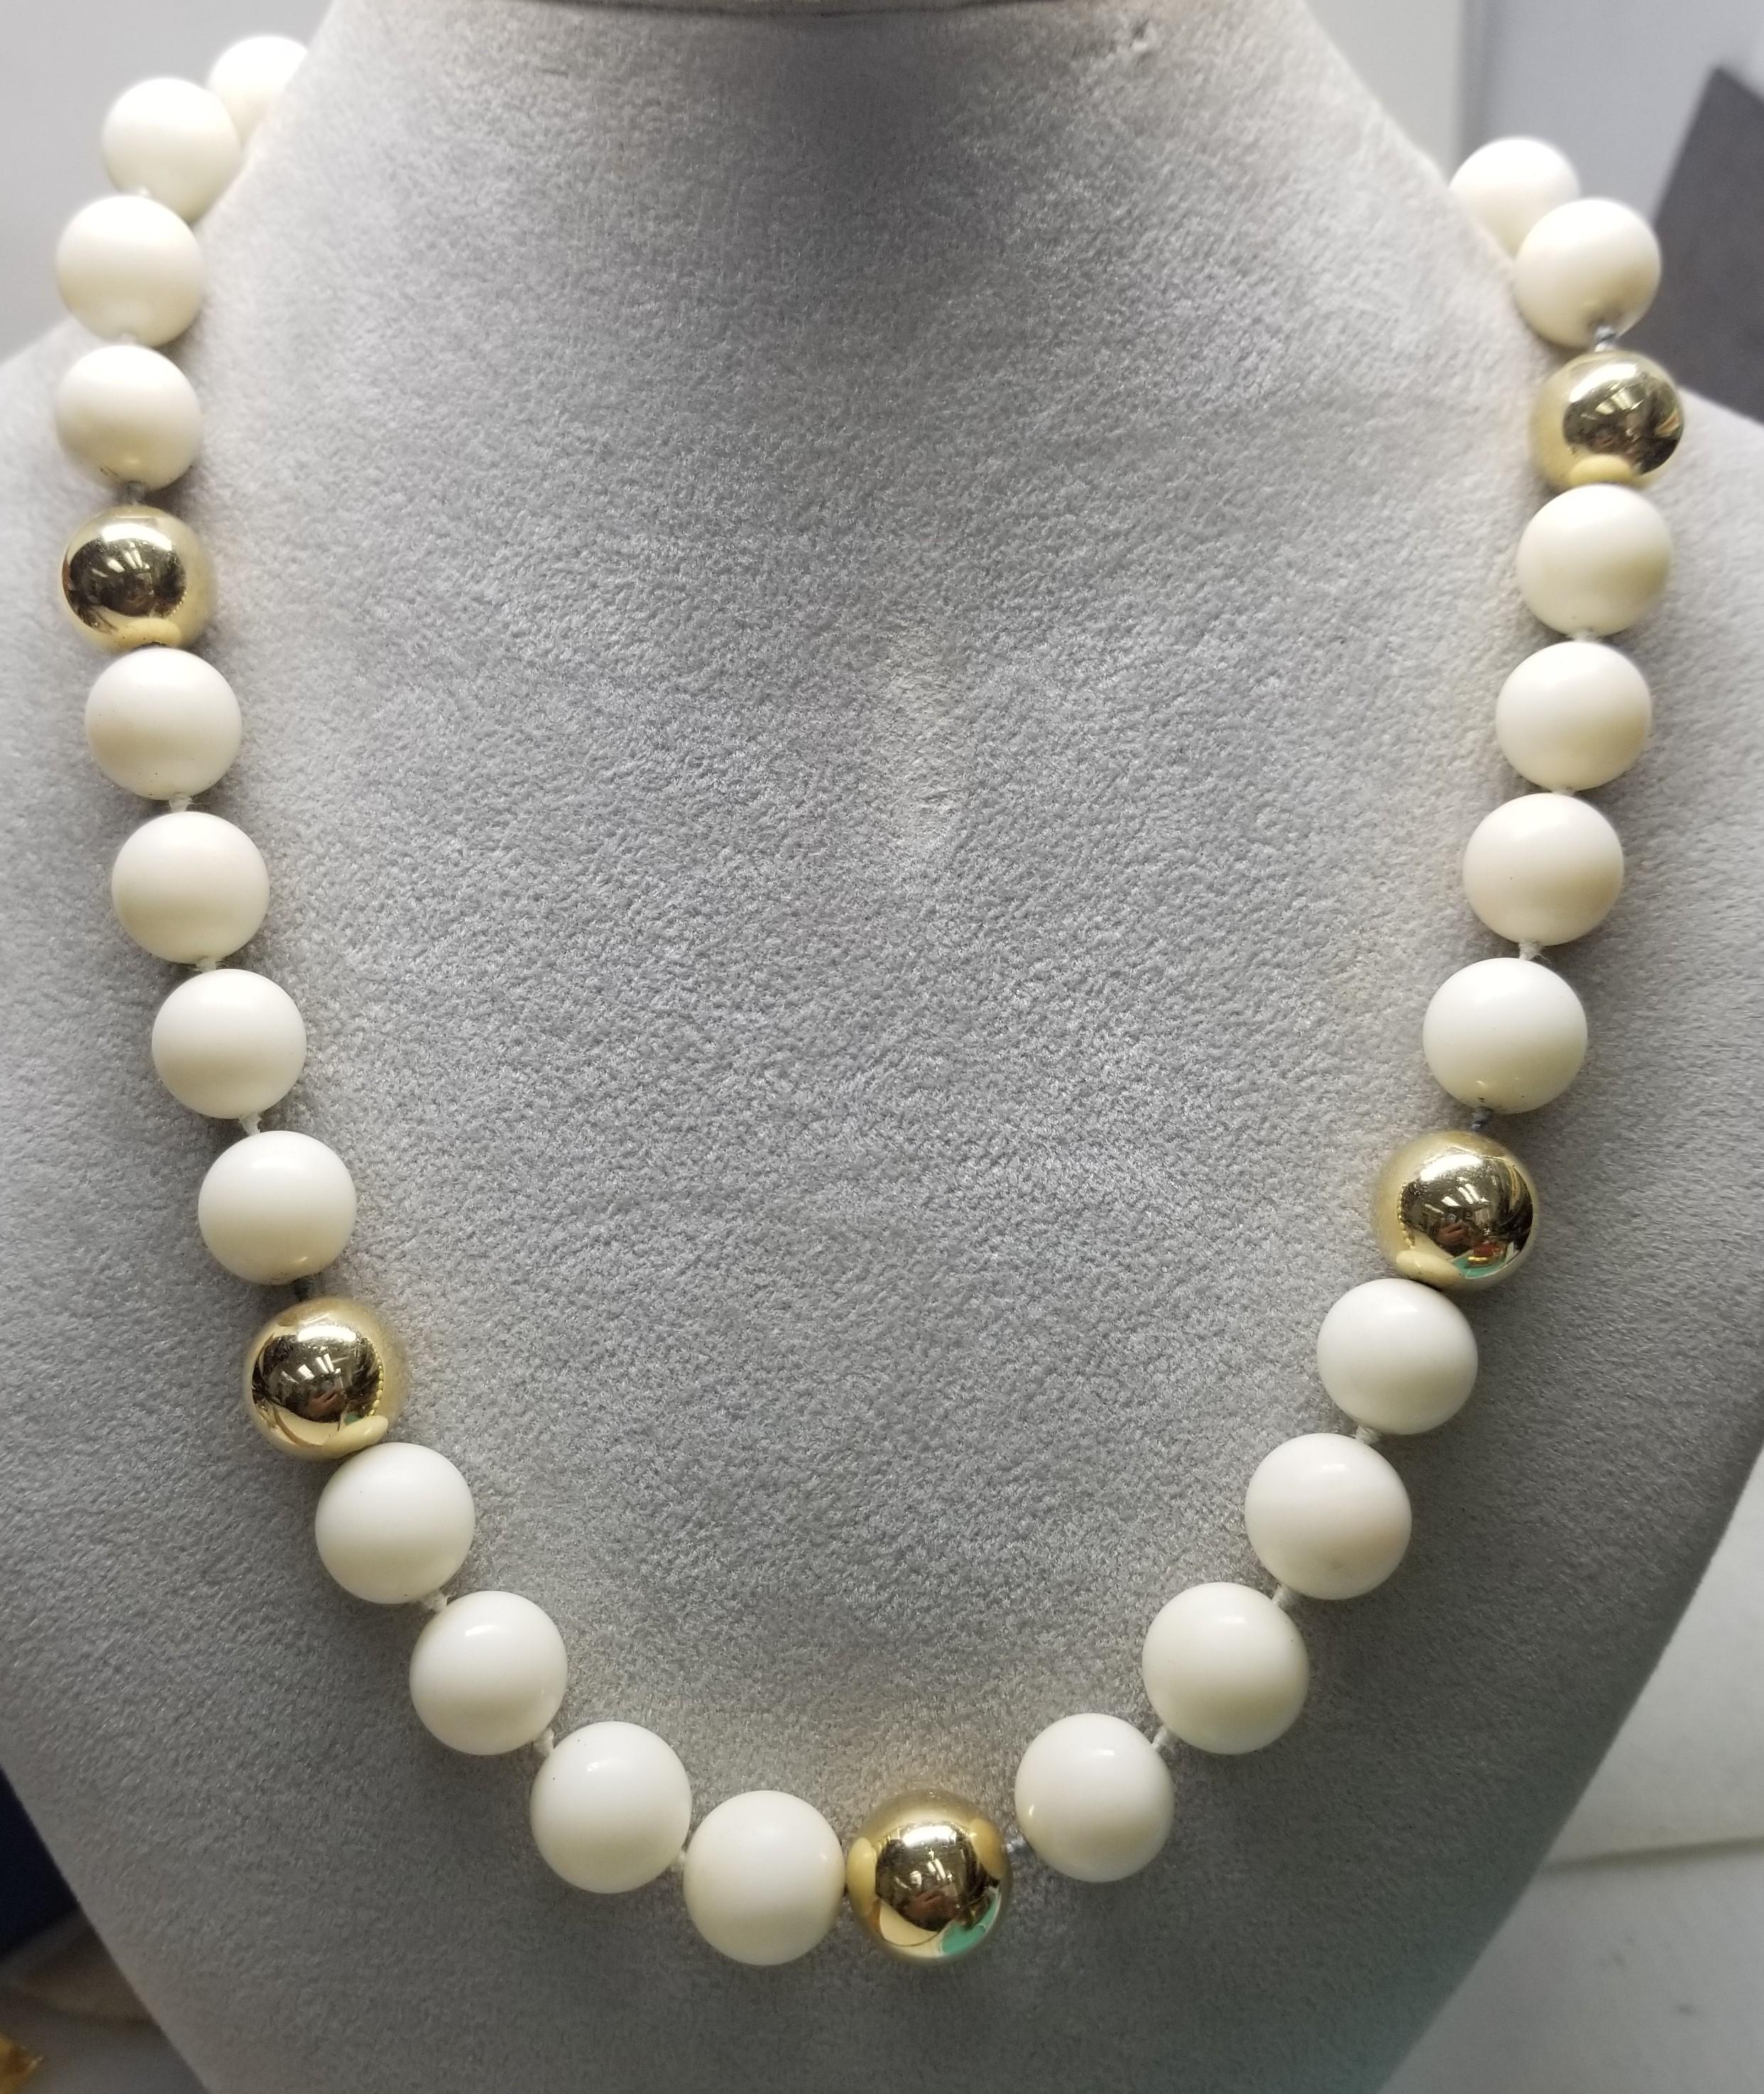 Vintage Gump's White Coral 14K Yellow Gold 12mmBead Necklace Fine Estate Jewelry For Sale 1